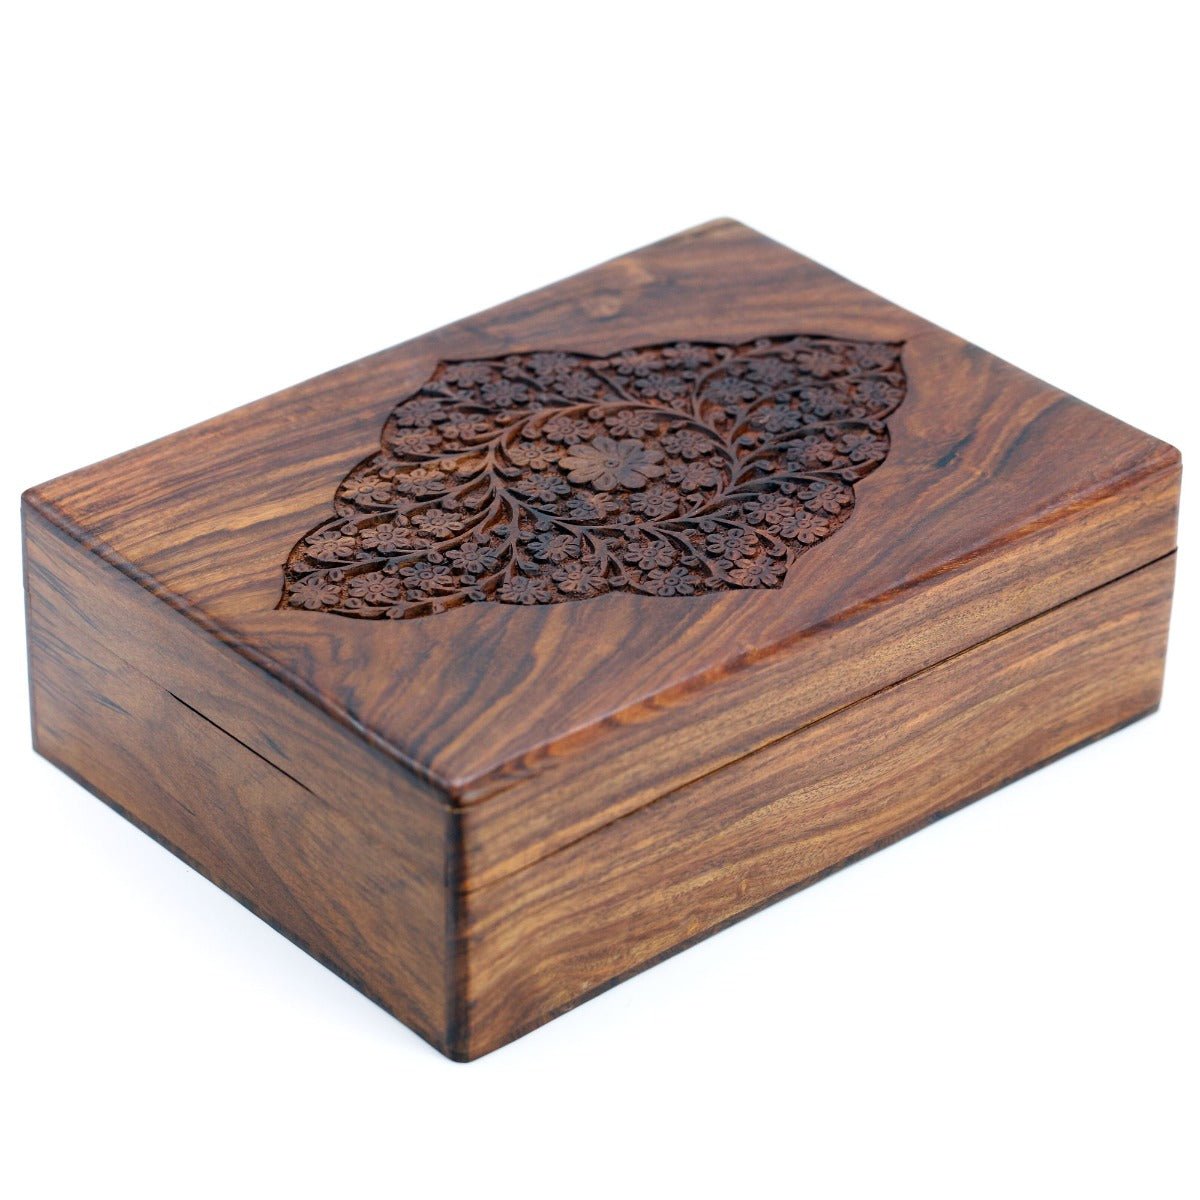 Carved Wood Box 8x11 - 13 Moons